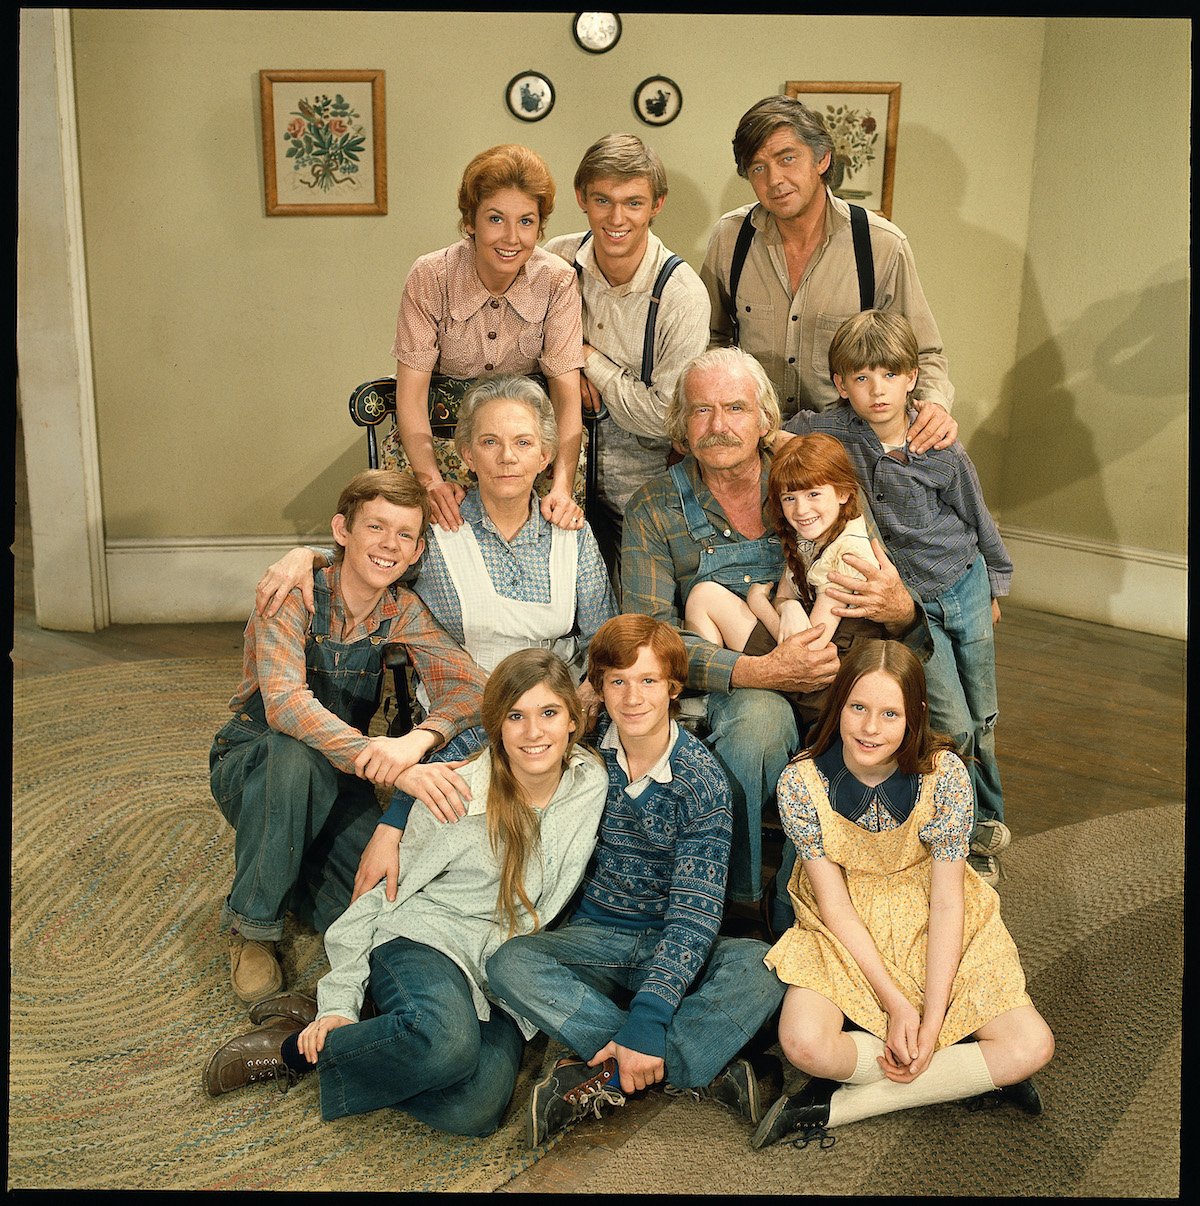 Group photo of 'The Waltons' cast in costume